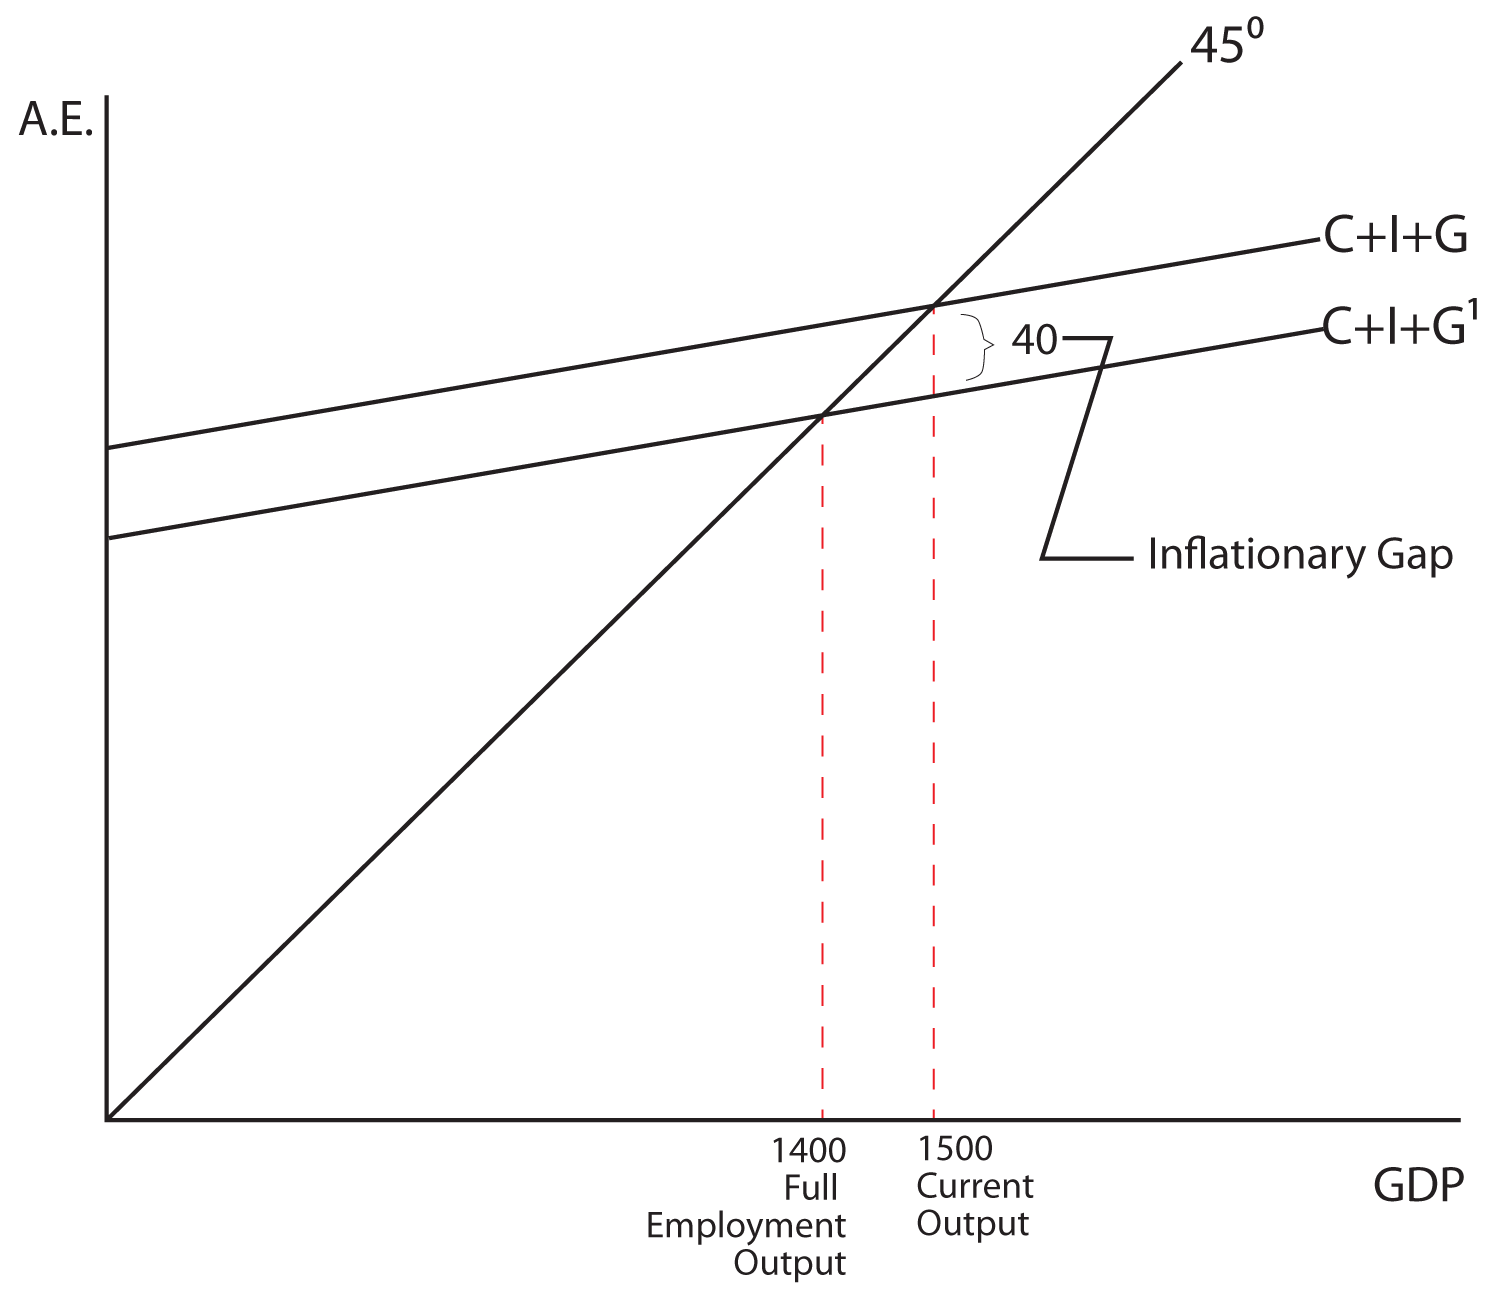 Image 7.13: The image shows a graph. The y axis is labeled A.E. The x axis is labeled GDP. There is a 45 degree line drawn from the origin. There are two lines drawn from the y axis, the first has a slope of C+I+G superscript 1 and it intersects the 45 degree line at 1400 units on the x axis, or full employment output, the second has a slope of C+I+G and it intersects the 45 degree line at 1500 units on the x axis, or current output. The area between C+I+G and C+I+G superscript 1 is 40 or inflationary gap.